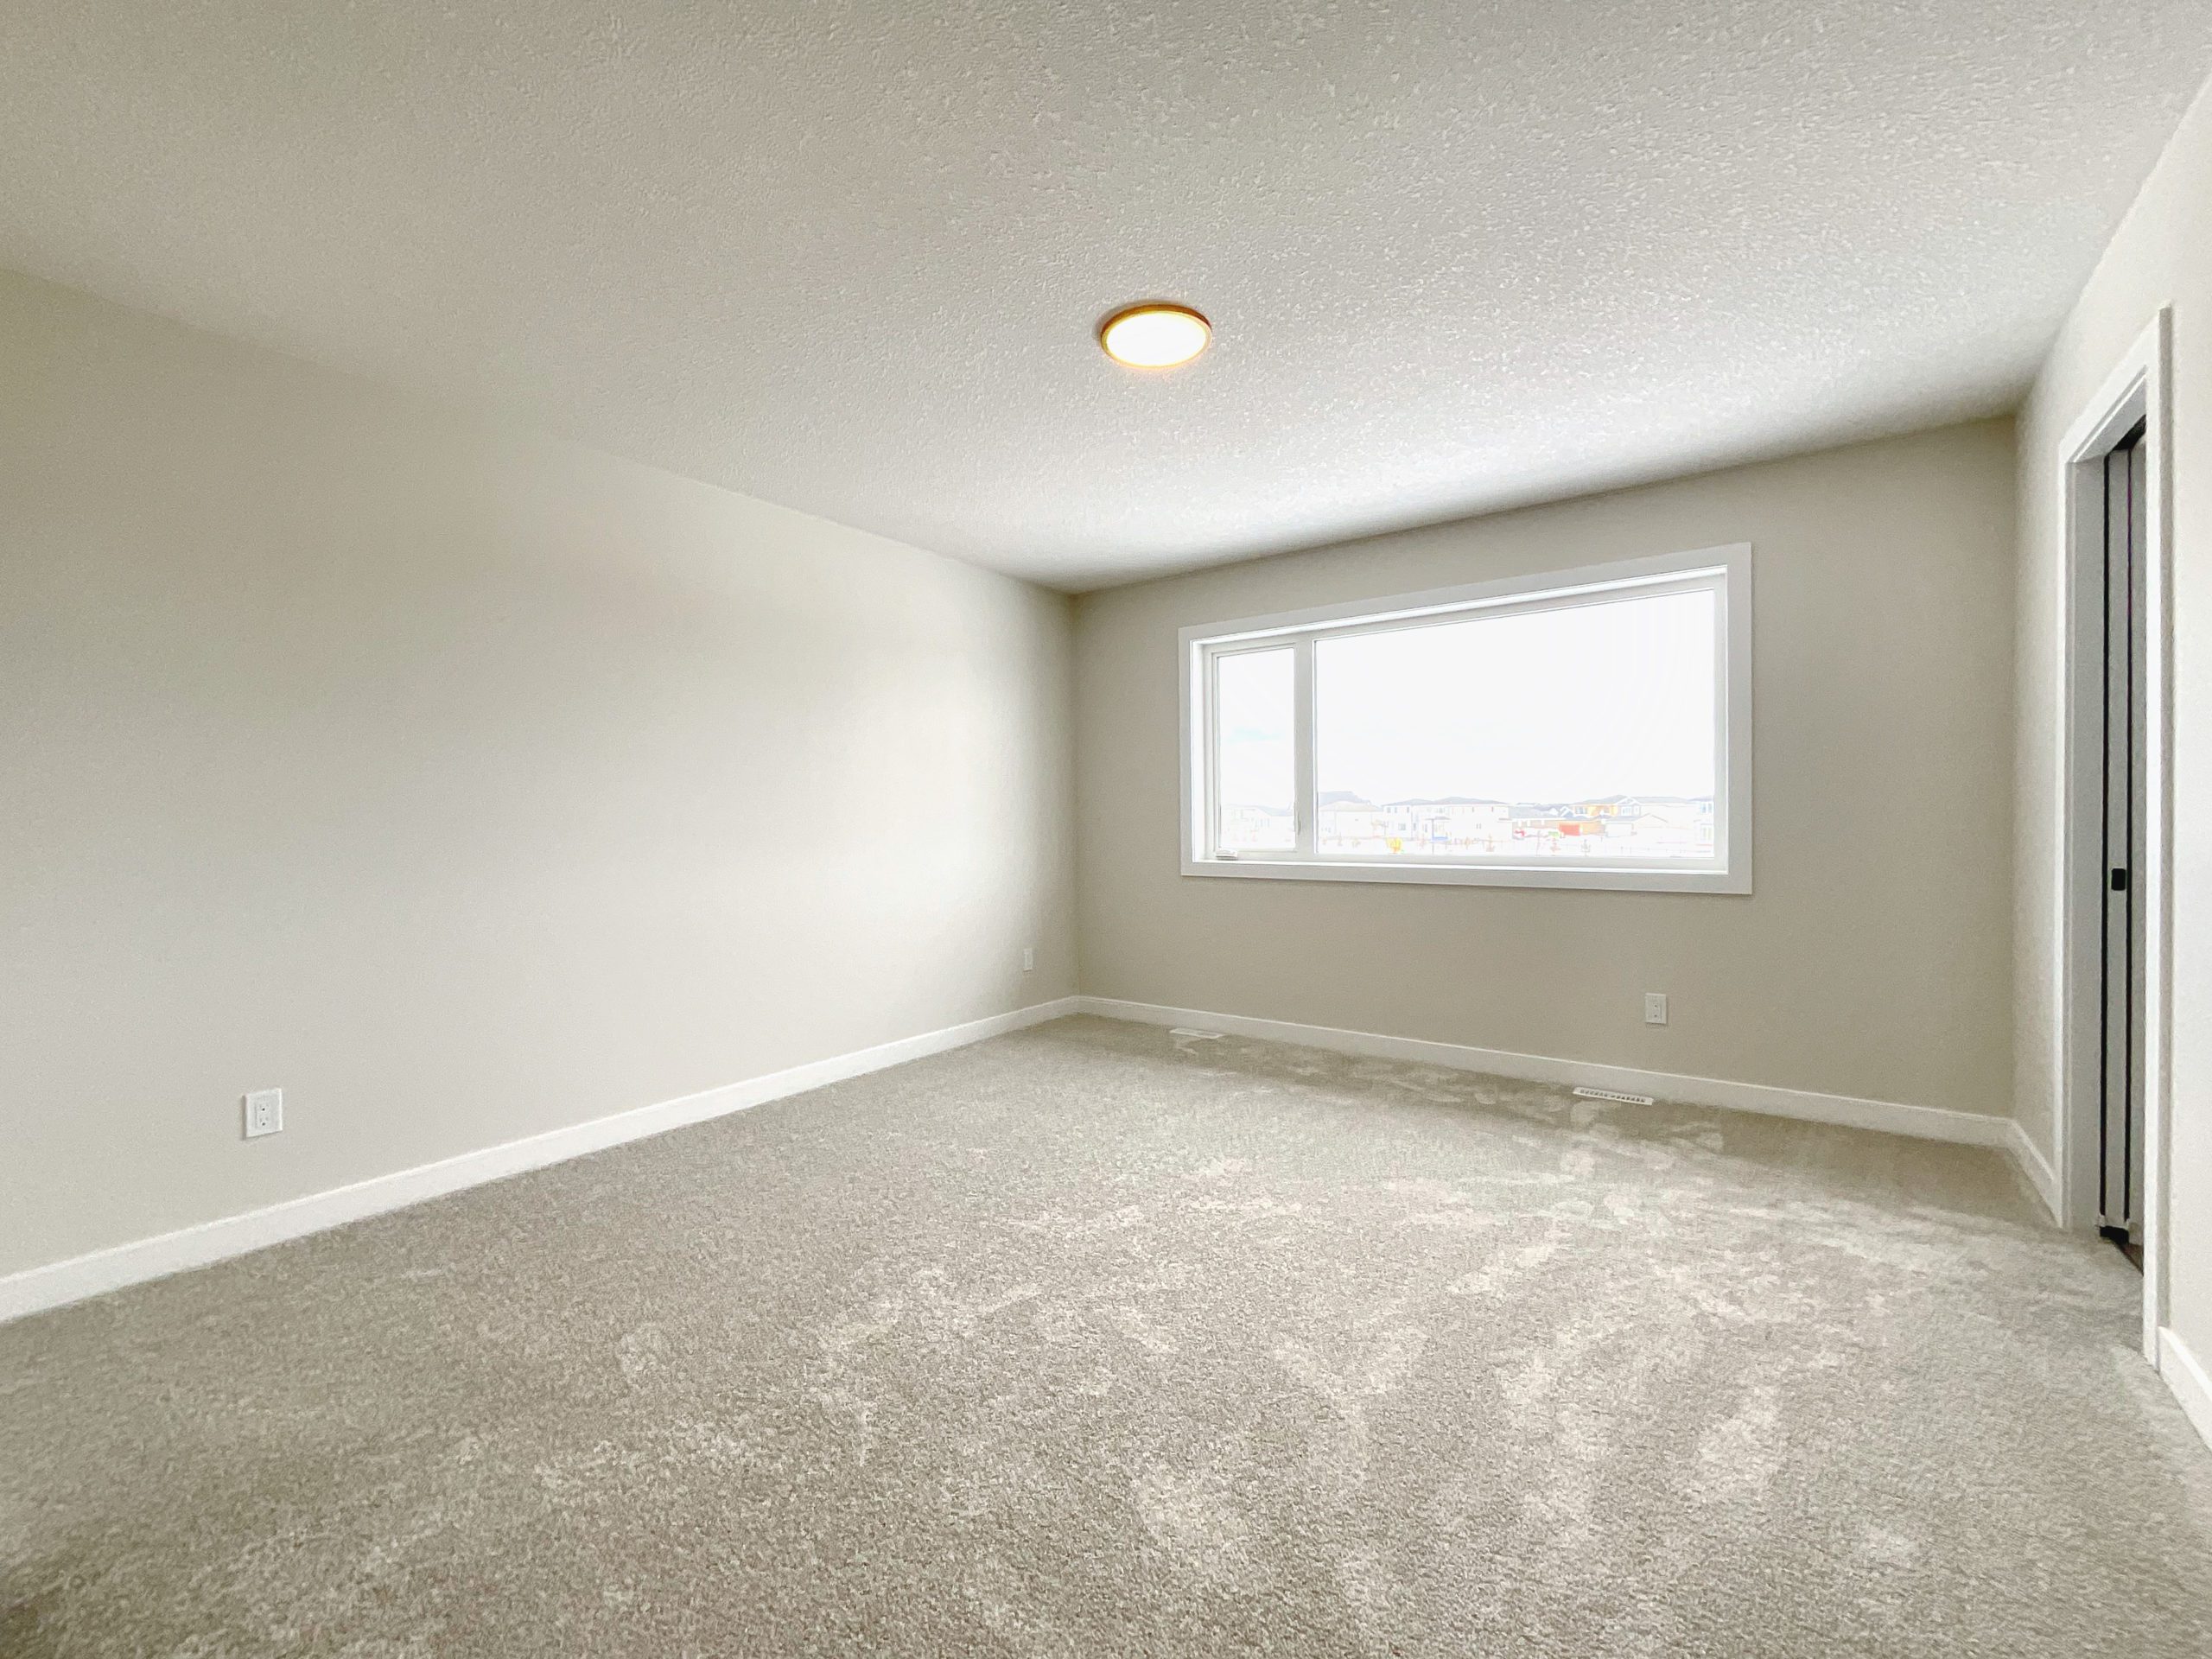 Shows empty primary bedroom with large window.